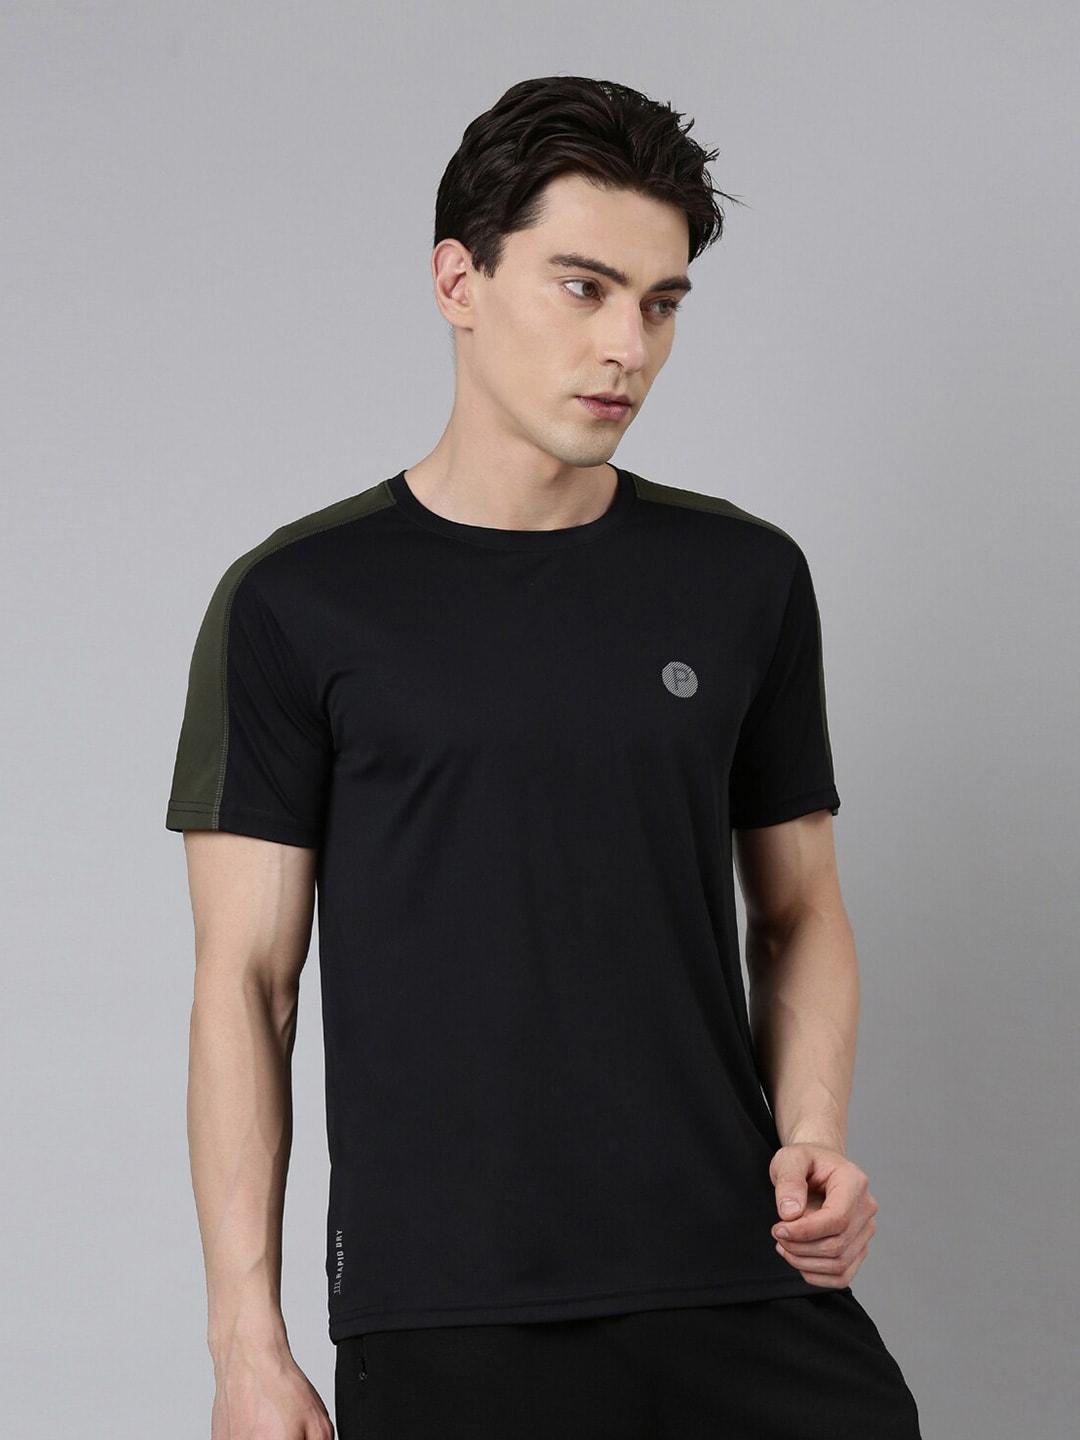 Pepe Jeans Men Round Neck Training Or Gym T-shirt